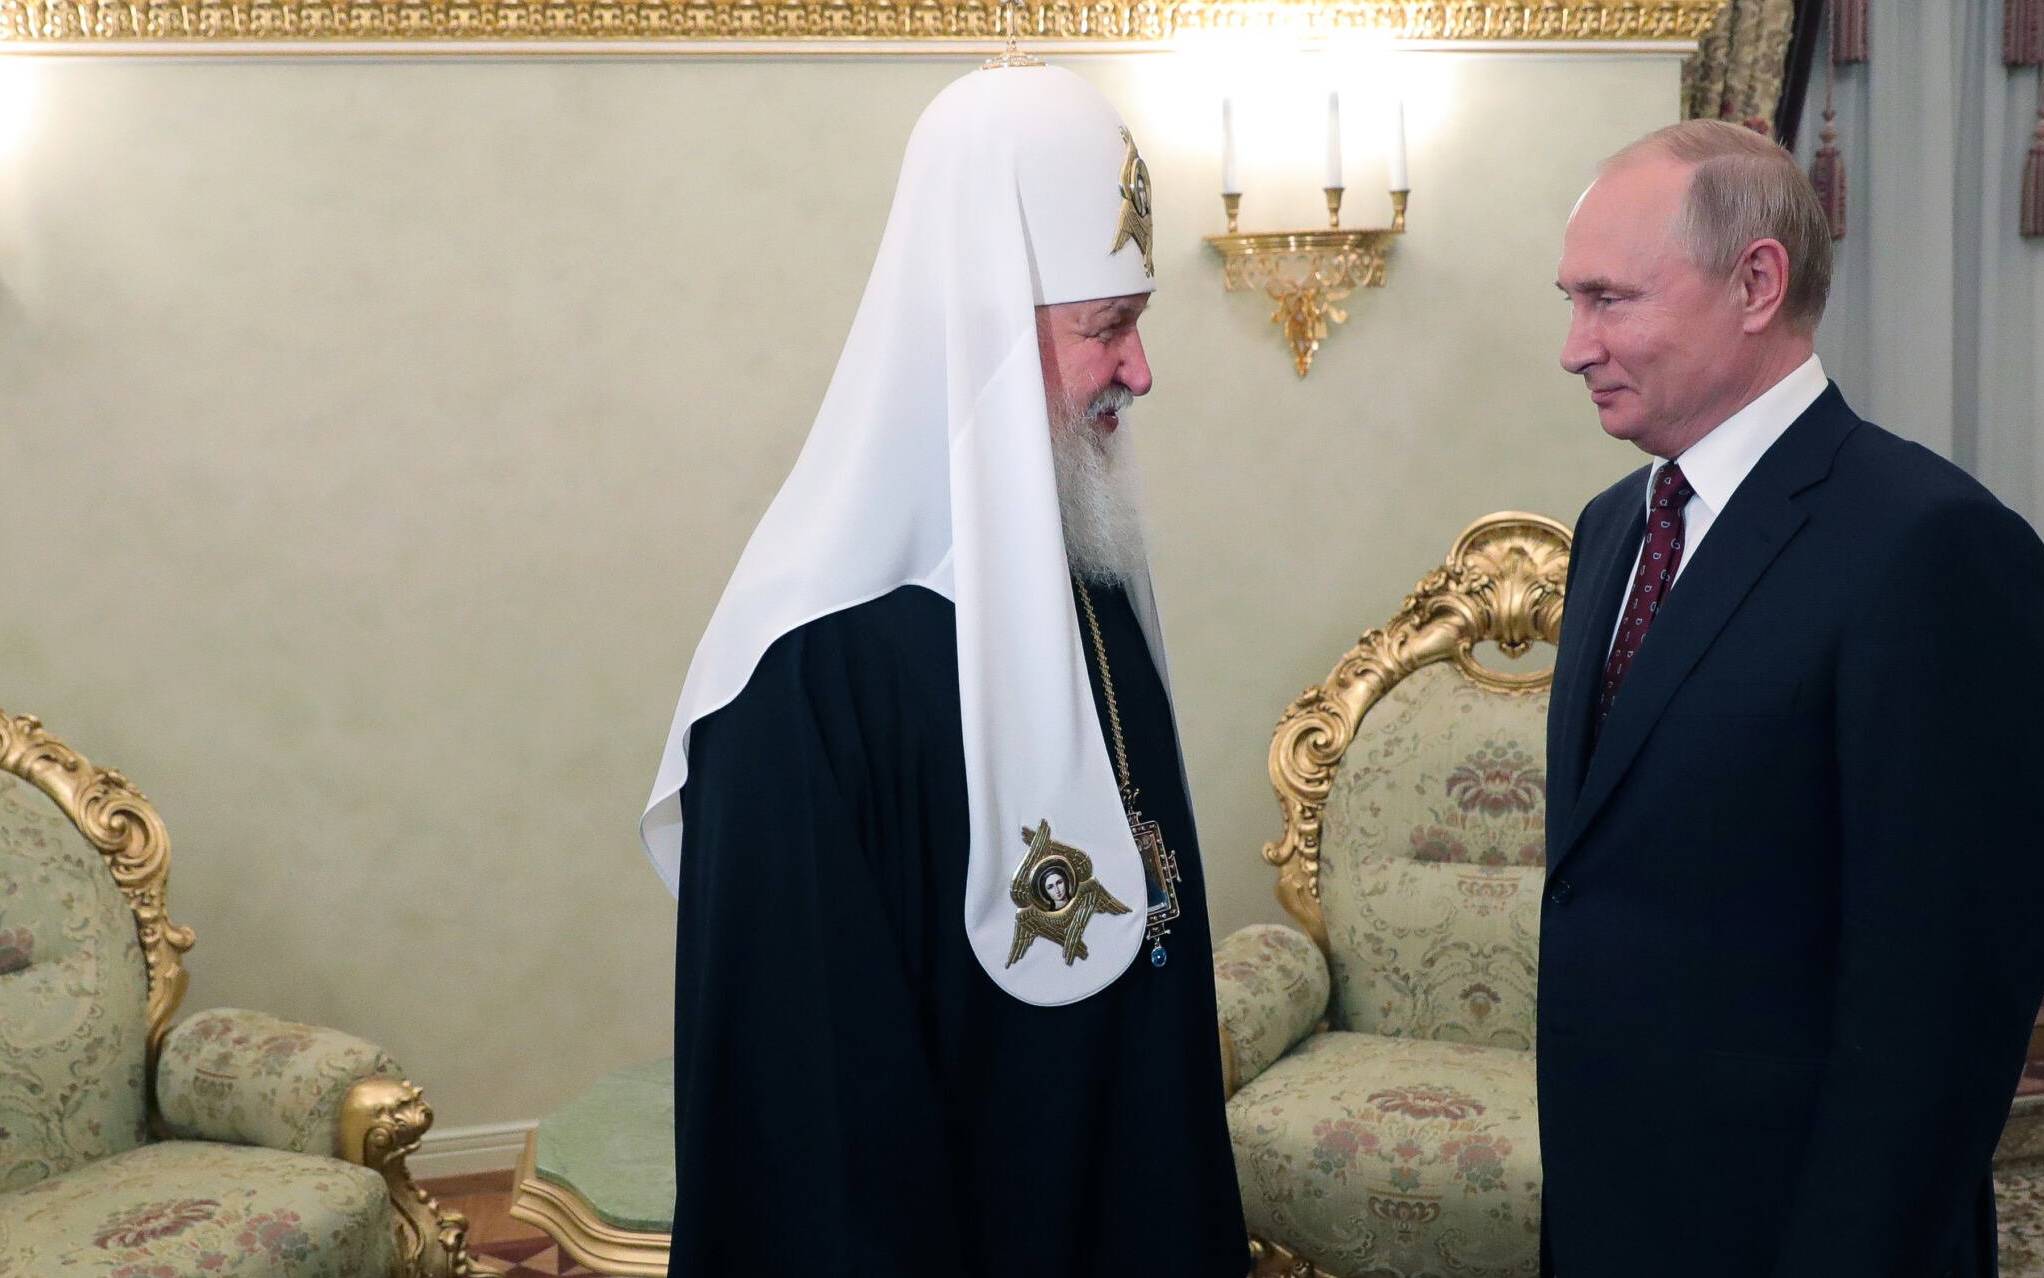 Russian President Vladimir Putin (R) meets with Patriarch Kirill, the head of the Russian Orthodox Church, to commemorate the day of Saints Cyril and Methodius, evangelisers of the Slavs, at the Kremlin in Moscow on May 24, 2019. (Photo by Mikhael Klimentyev / Sputnik / AFP)